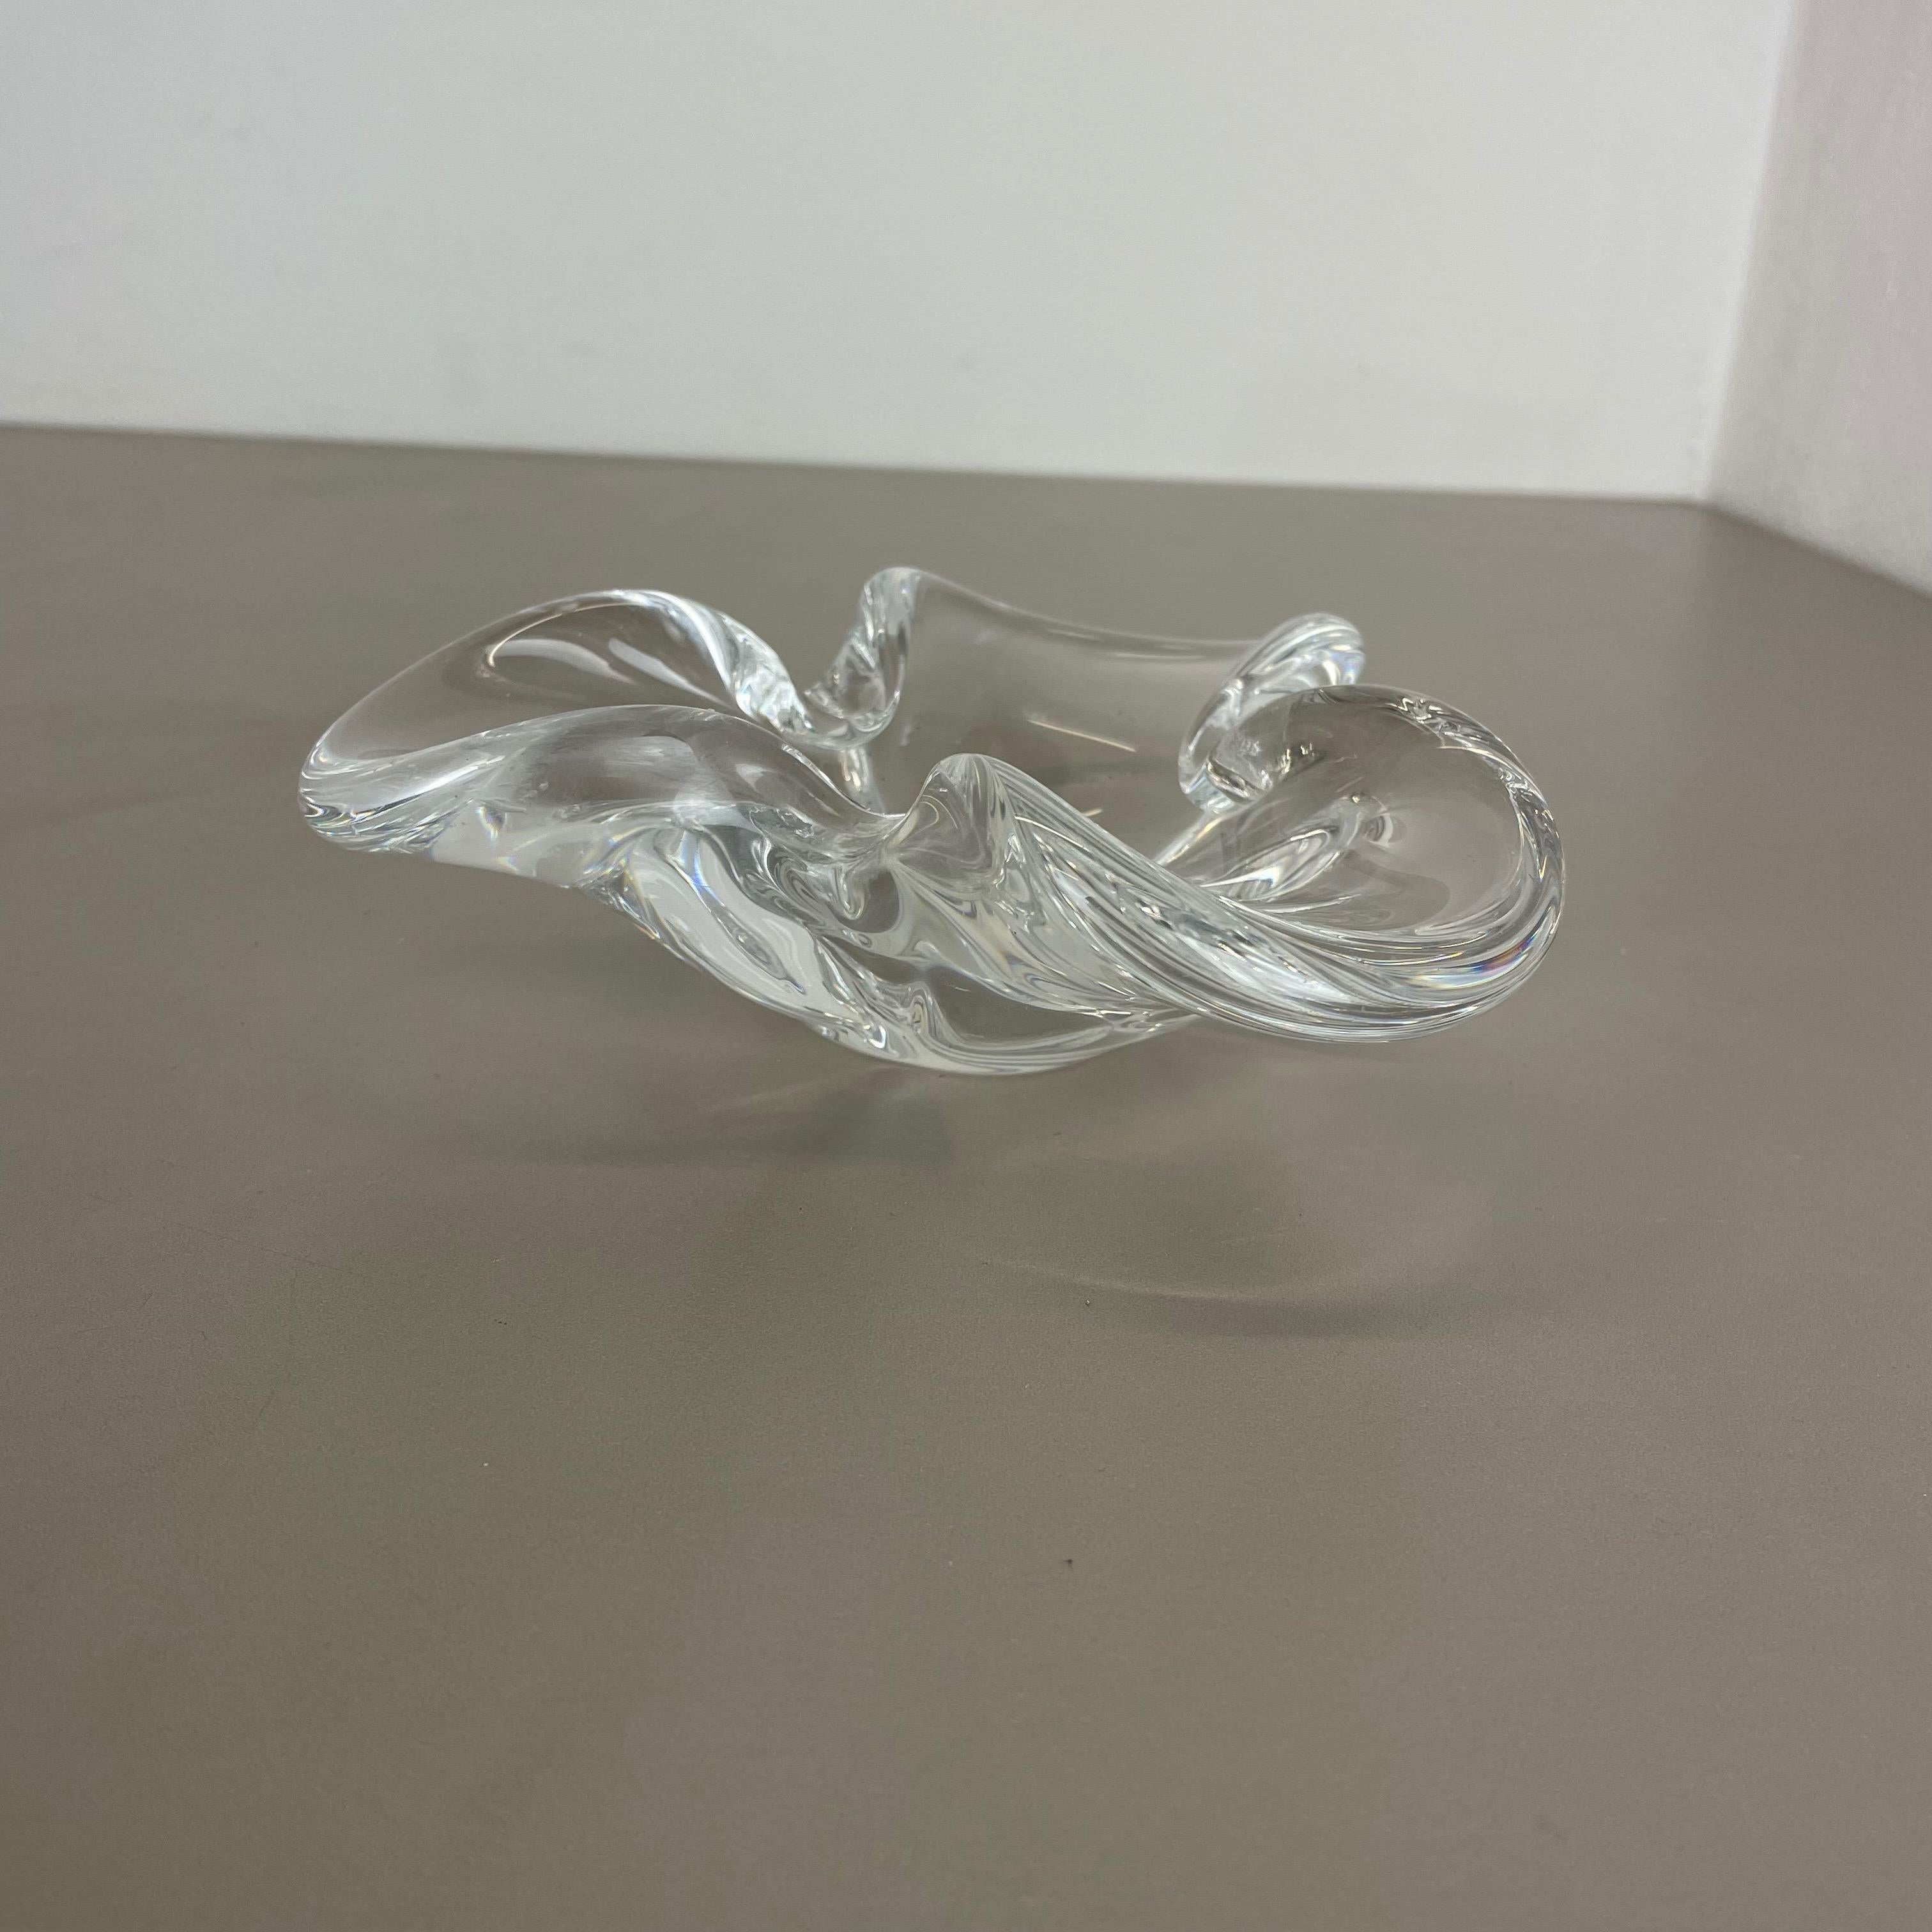 Article:

Murano glass bowl, ashtray element


Origin:

Murano, Italy


Decade:

1970s



This original vintage glass bowl element, ash tray was produced in the 1970s in Murano, Italy. It is made in clear glasstechnique and has a